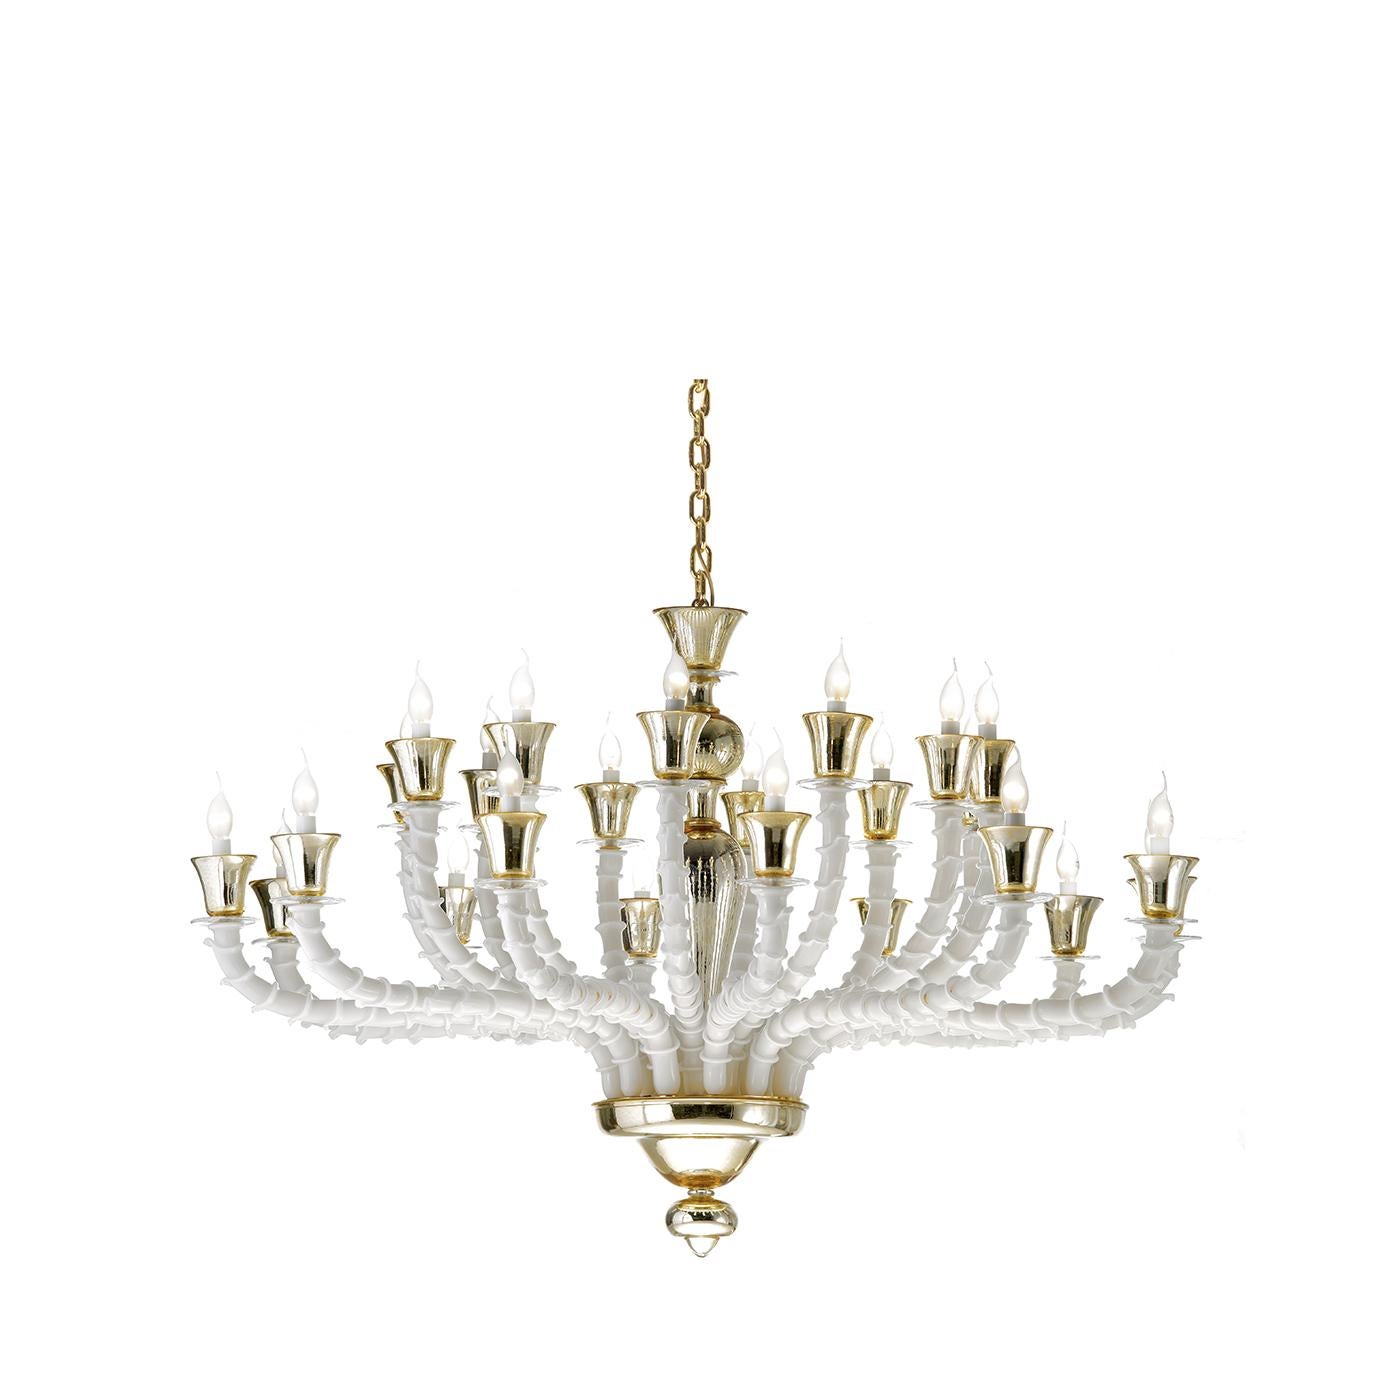 This majestic piece of functional decoration will add a sumptuous accent to any large room. Mixing the traditional Rezzonico style of Murano glass chandeliers with contemporary details, this piece is timeless, sophisticated, and will complement any